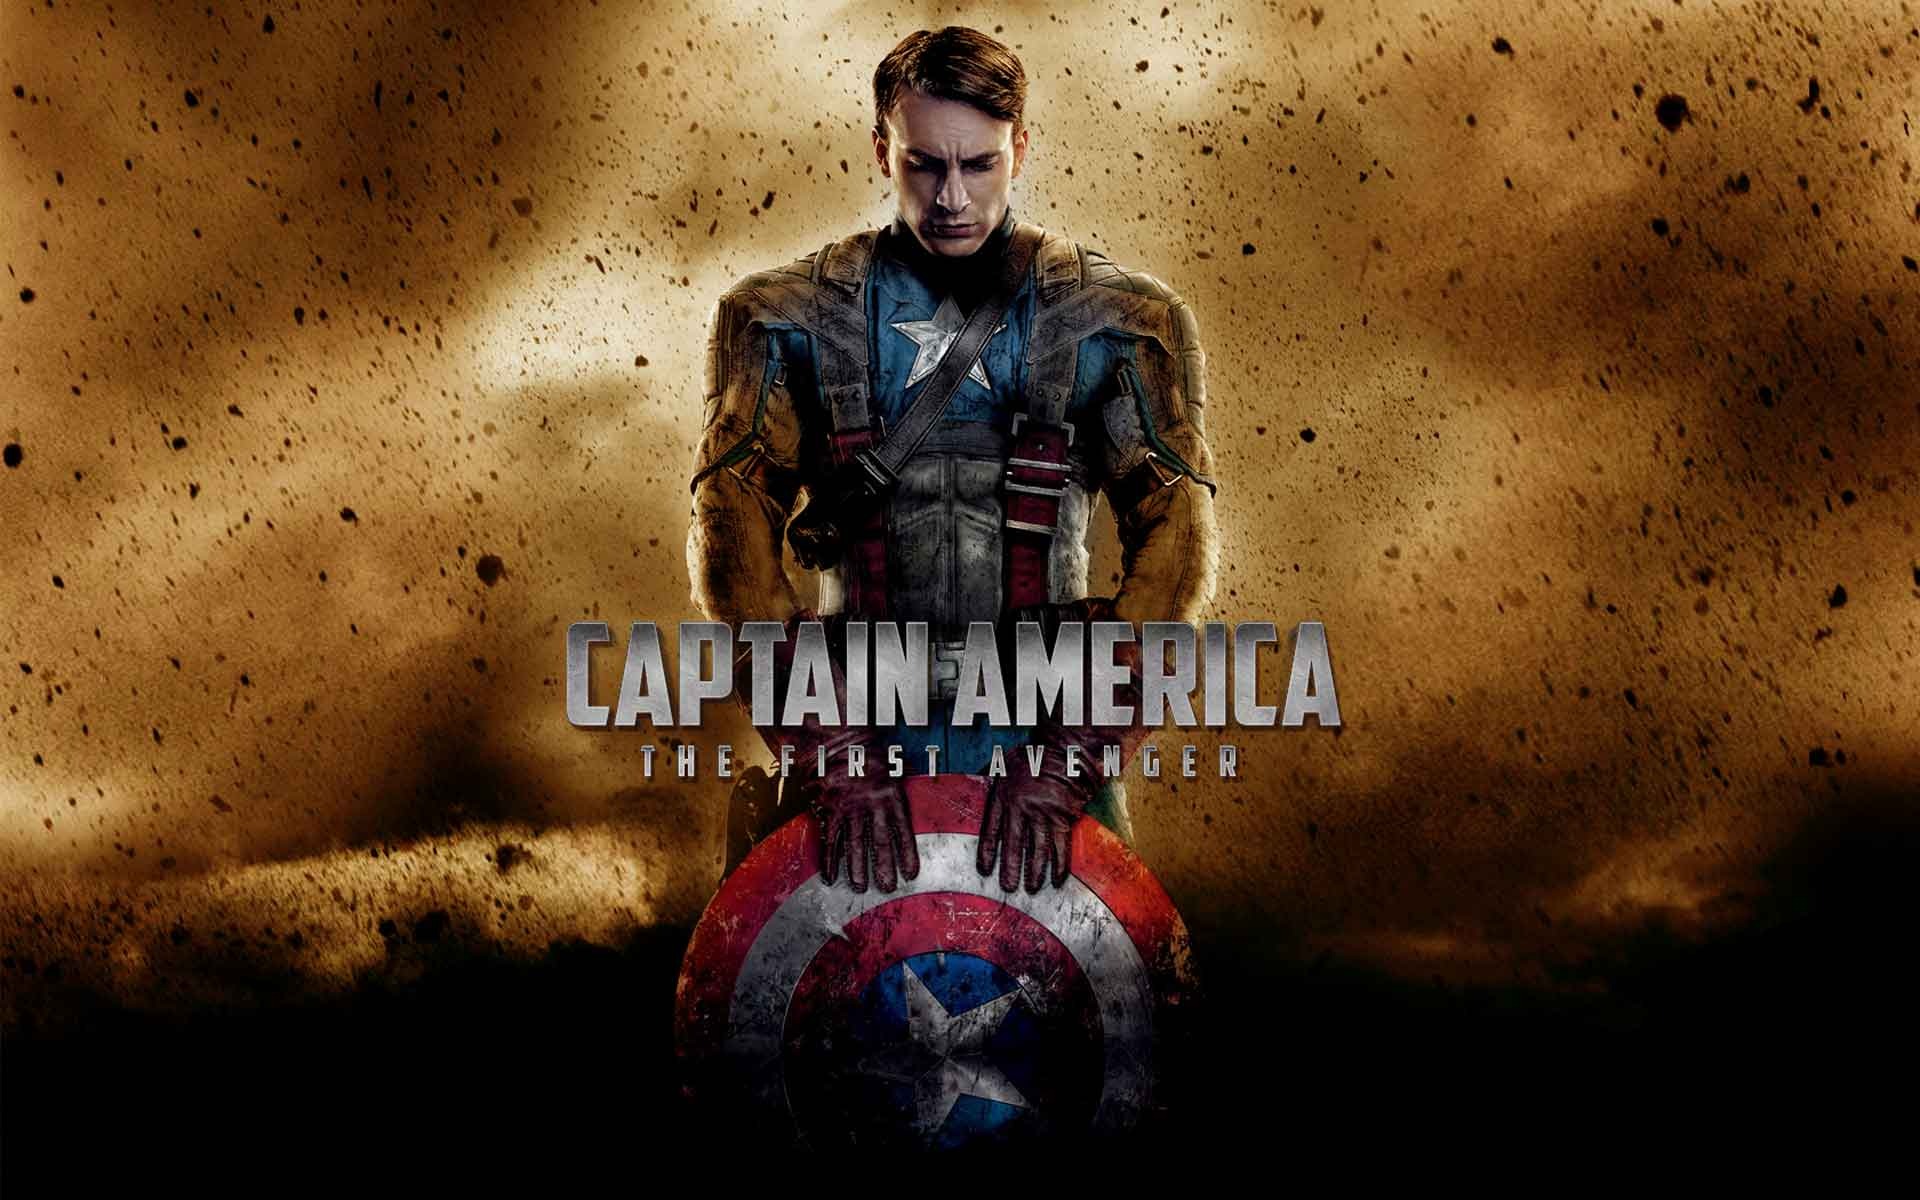 Captain America: The First Avenger wallpapers HD #7 - 1920x1200